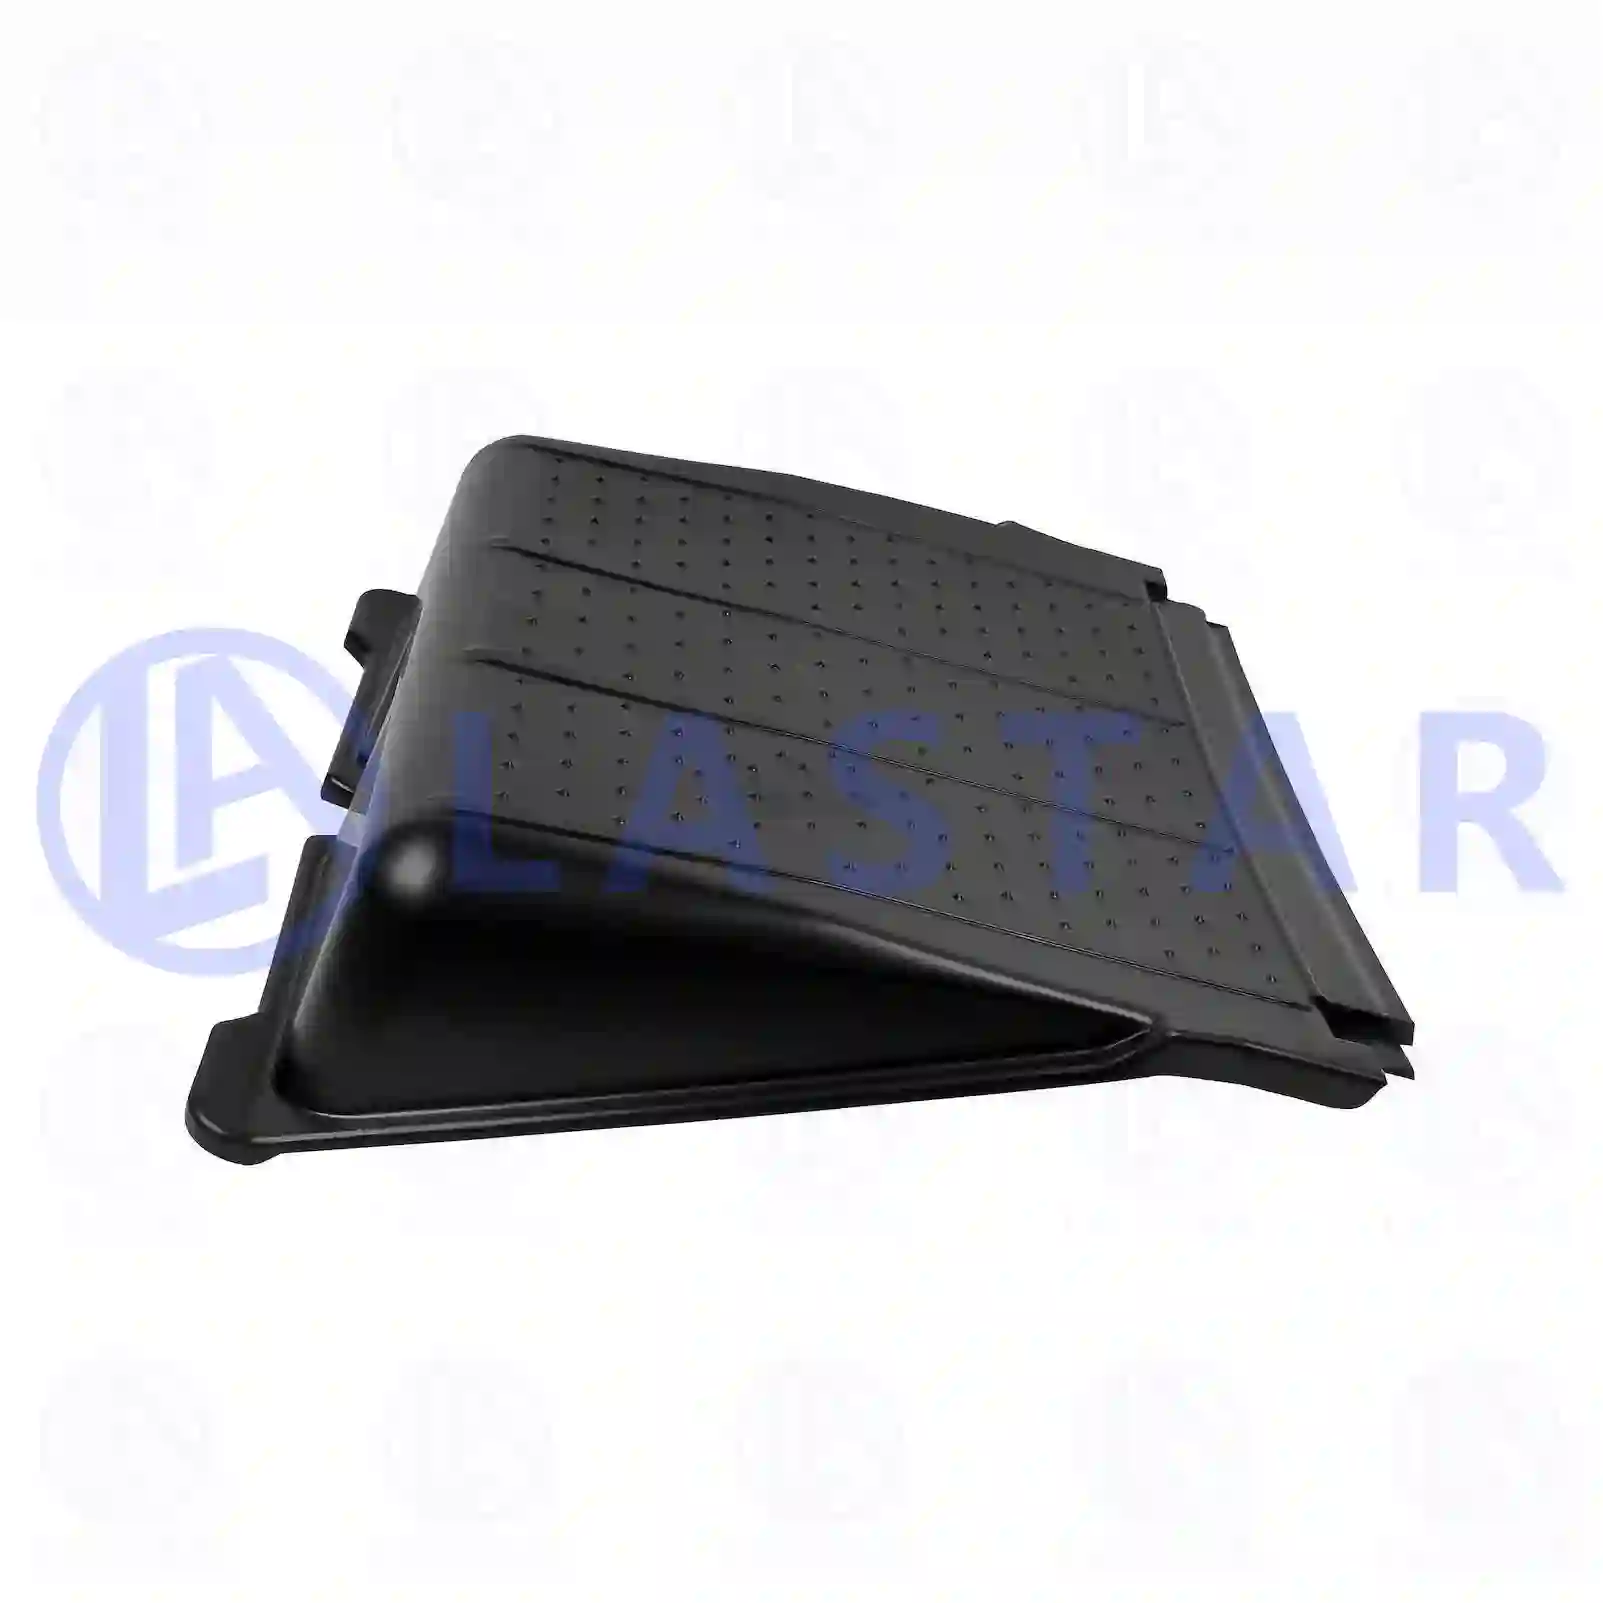 Battery cover, 77710074, 9305410103, 9415410103, ZG60035-0008 ||  77710074 Lastar Spare Part | Truck Spare Parts, Auotomotive Spare Parts Battery cover, 77710074, 9305410103, 9415410103, ZG60035-0008 ||  77710074 Lastar Spare Part | Truck Spare Parts, Auotomotive Spare Parts